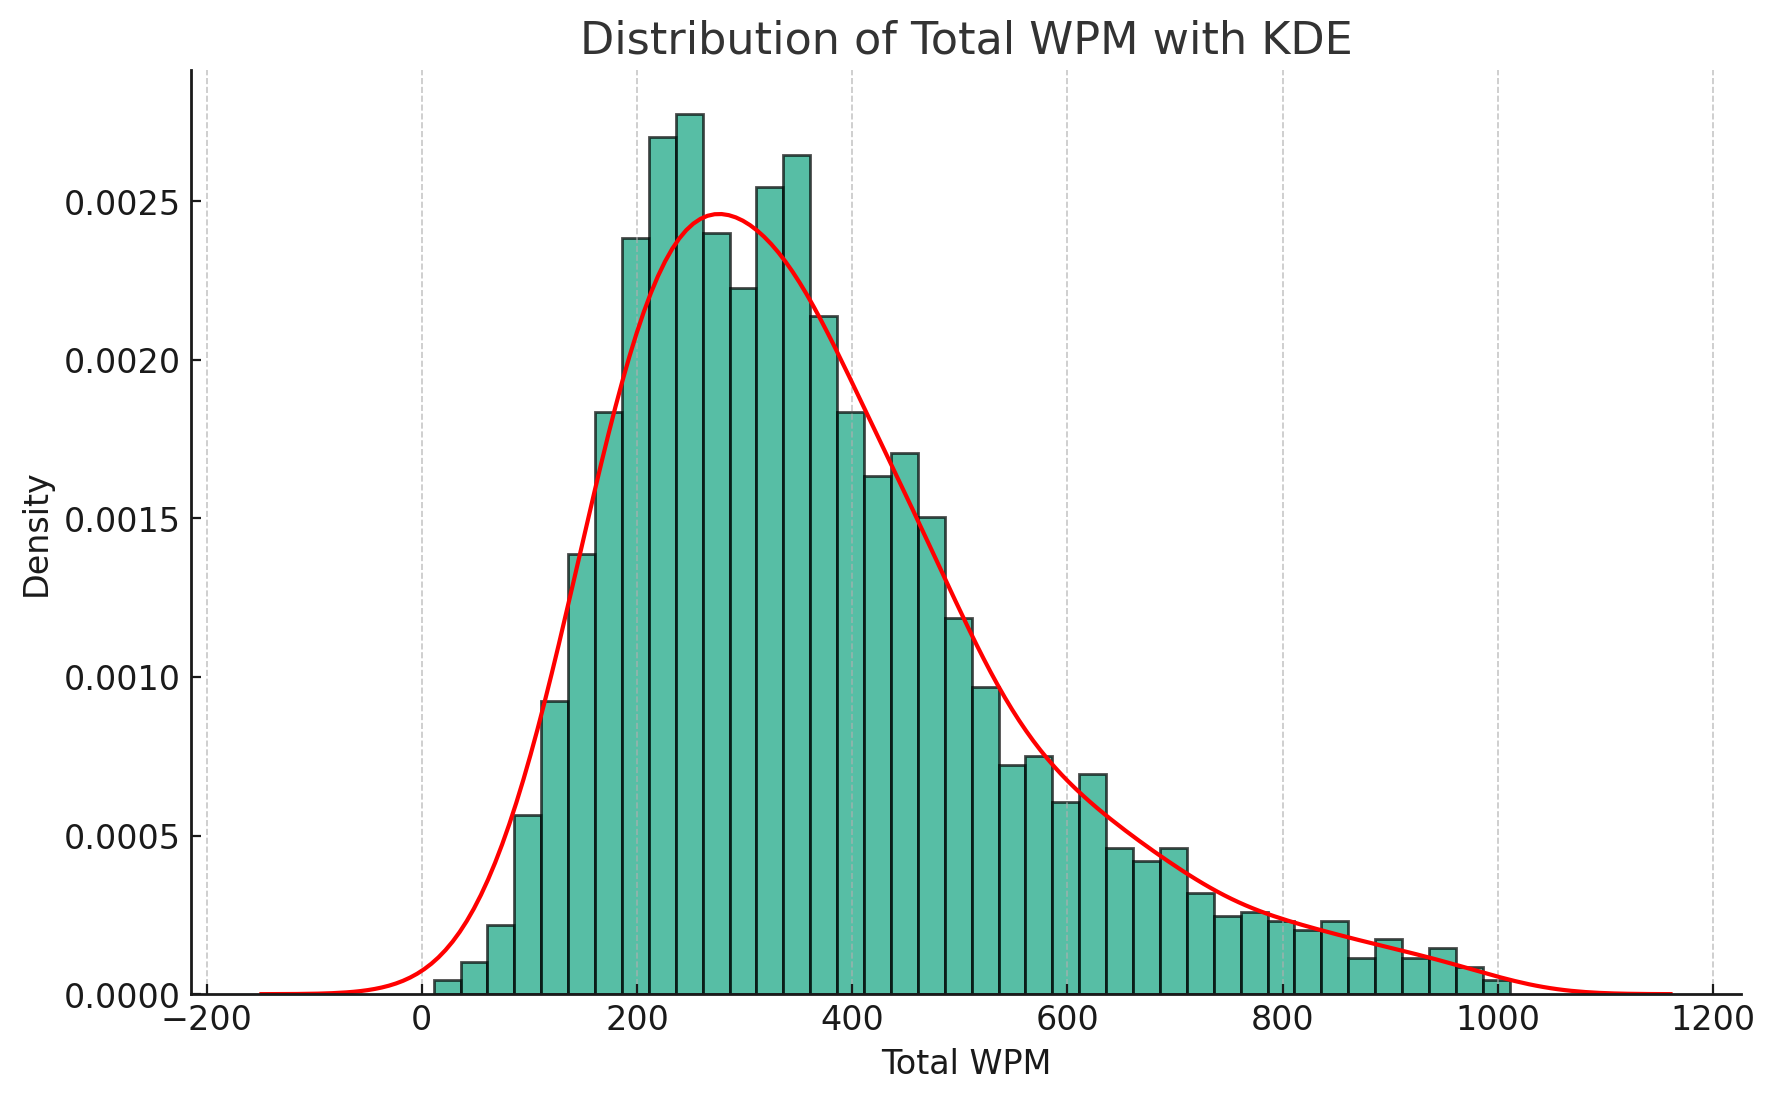 Distribution of reading speeds is right skewed